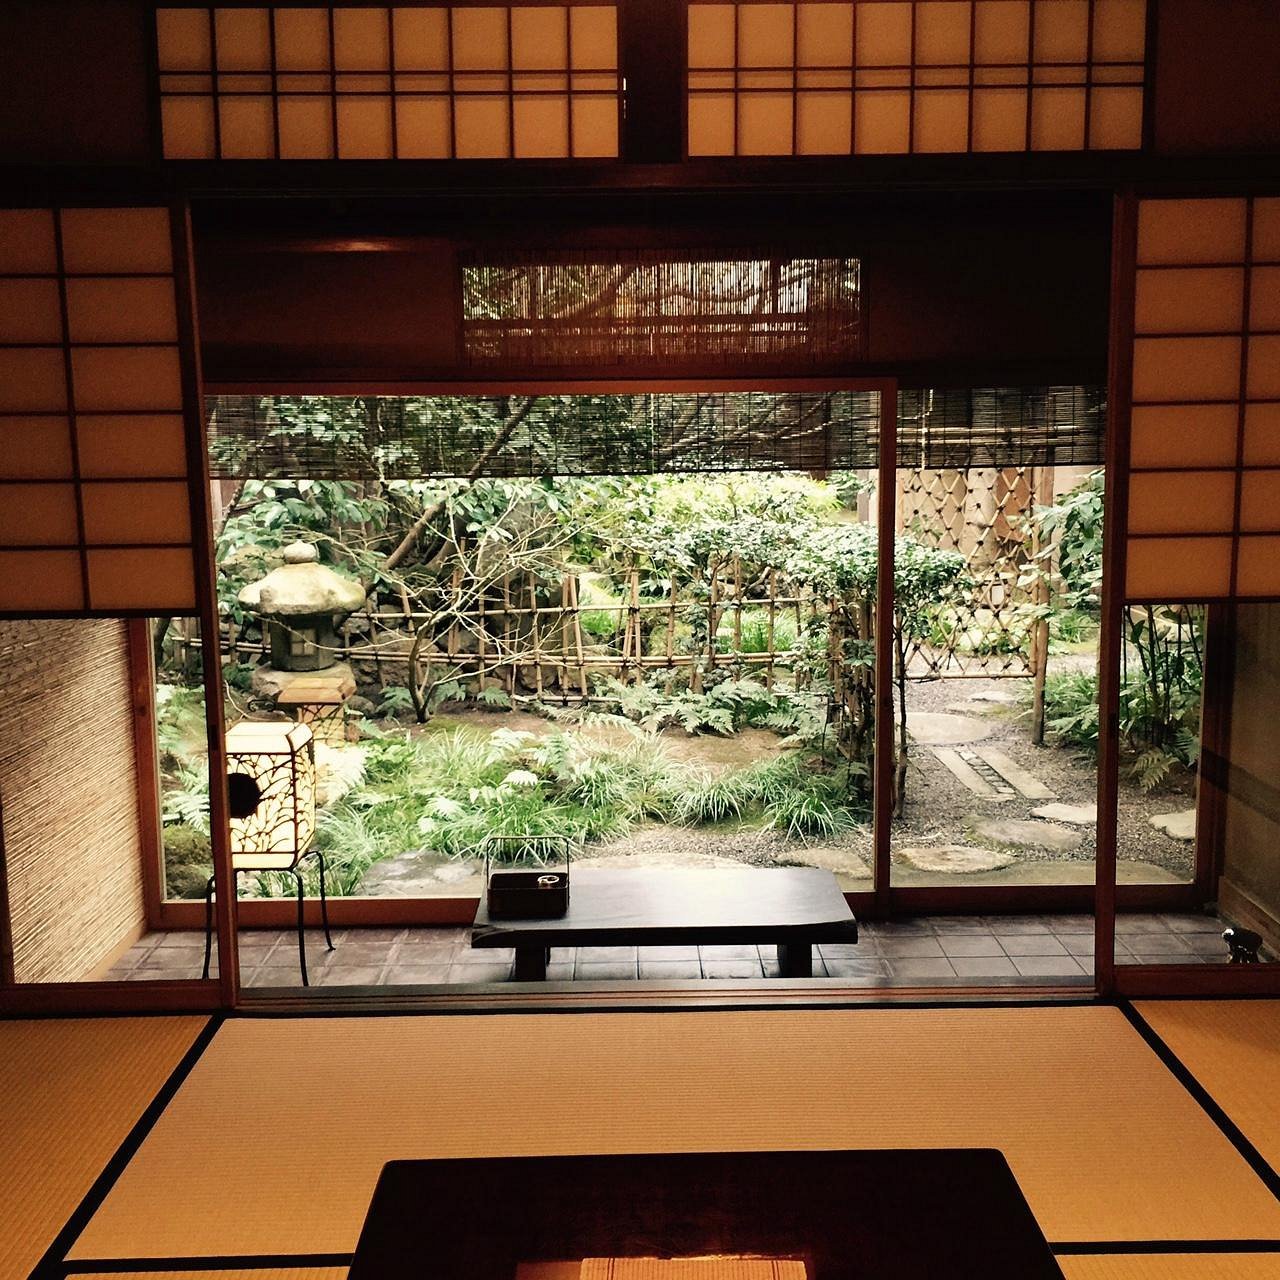 <p><a href="https://travelswiththecrew.com/explore-japan-from-home/">Kyoto, Japan</a> is a city steeped in history and tradition. One way to fully experience this is by staying in a traditional ryokan, or Japanese inn. These inns offer a glimpse into the past, with tatami mat floors, sliding paper doors, and communal hot springs.</p><p><a href="https://www.tripadvisor.com/Hotel_Review-g298564-d310306-Reviews-Tawaraya_Ryokan-Kyoto_Kyoto_Prefecture_Kinki.html"><strong>One such ryokan is the Tawaraya,</strong></a> which has been operating for over 300 years. Guests are greeted with a traditional tea ceremony and can enjoy kaiseki, a multi-course dinner featuring local ingredients. The ryokan also offers a private garden and hot spring bath for guests to relax.</p>